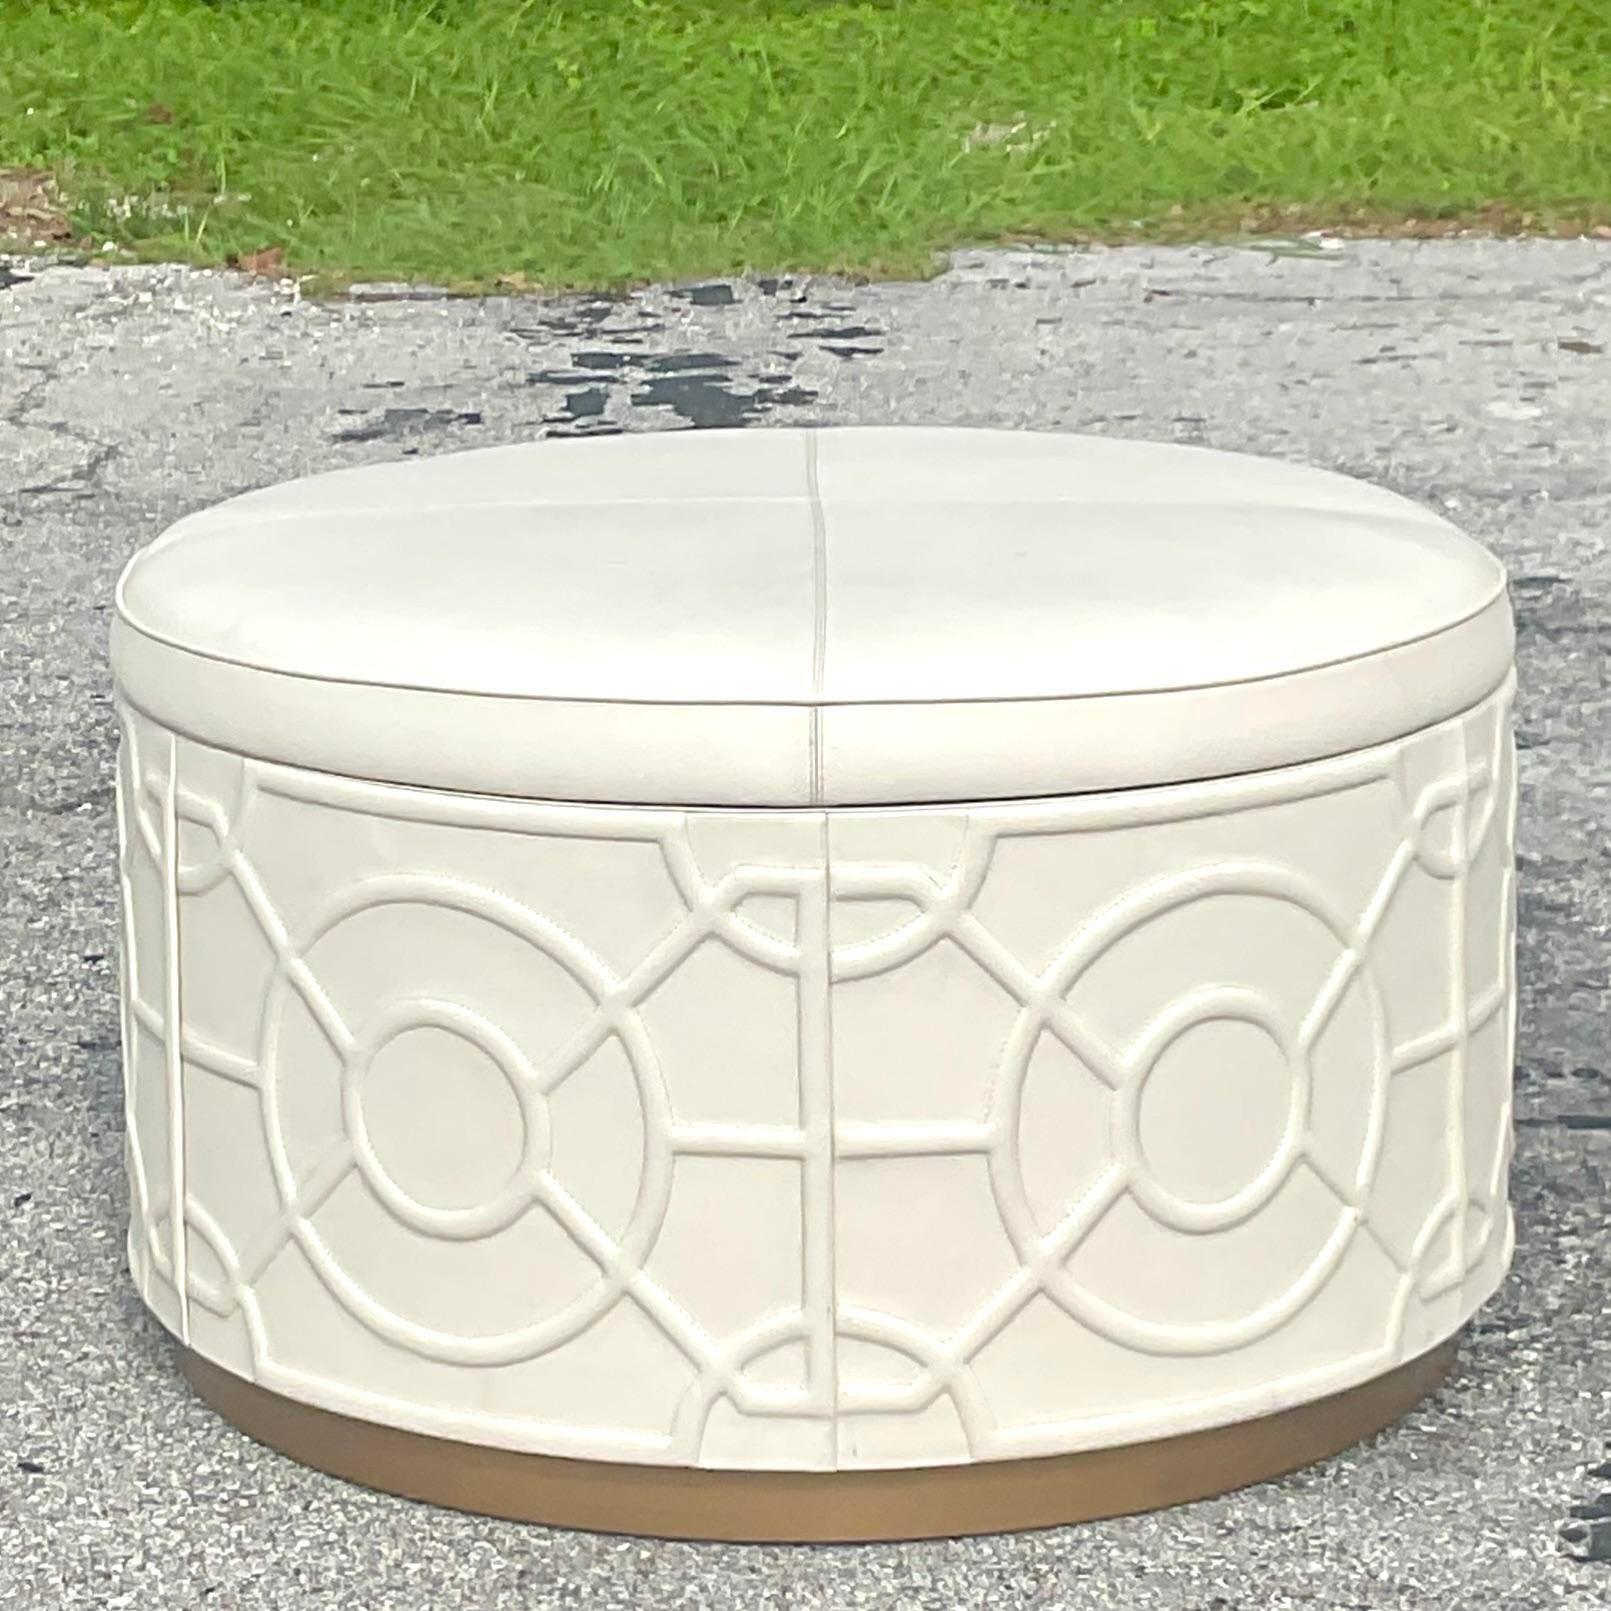 A fabulous vintage Regency storage ottoman. Beautiful tooled leather exterior with a chic grey suede interior. Gorgeous and functional. Acquired from a Palm Beach estate.